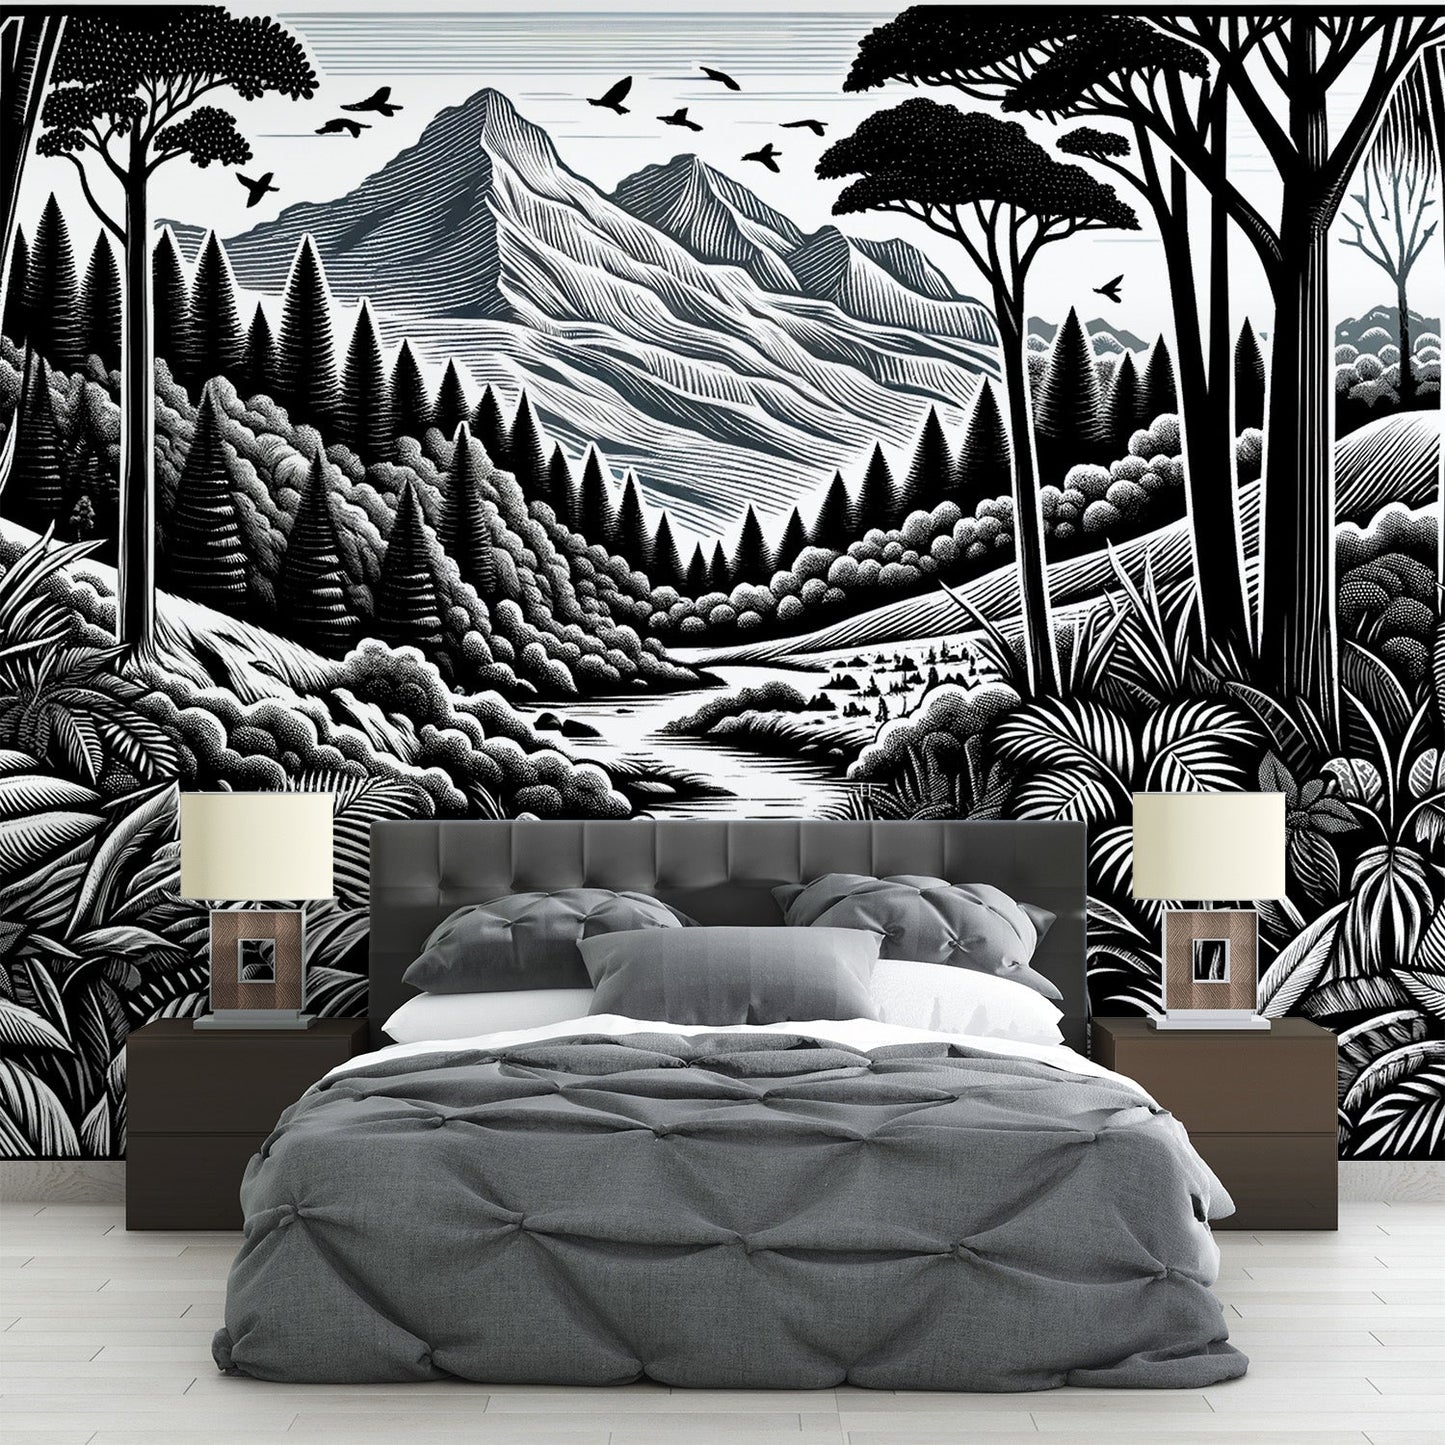 Black and white jungle wallpaper | Vegetation and mountainous relief